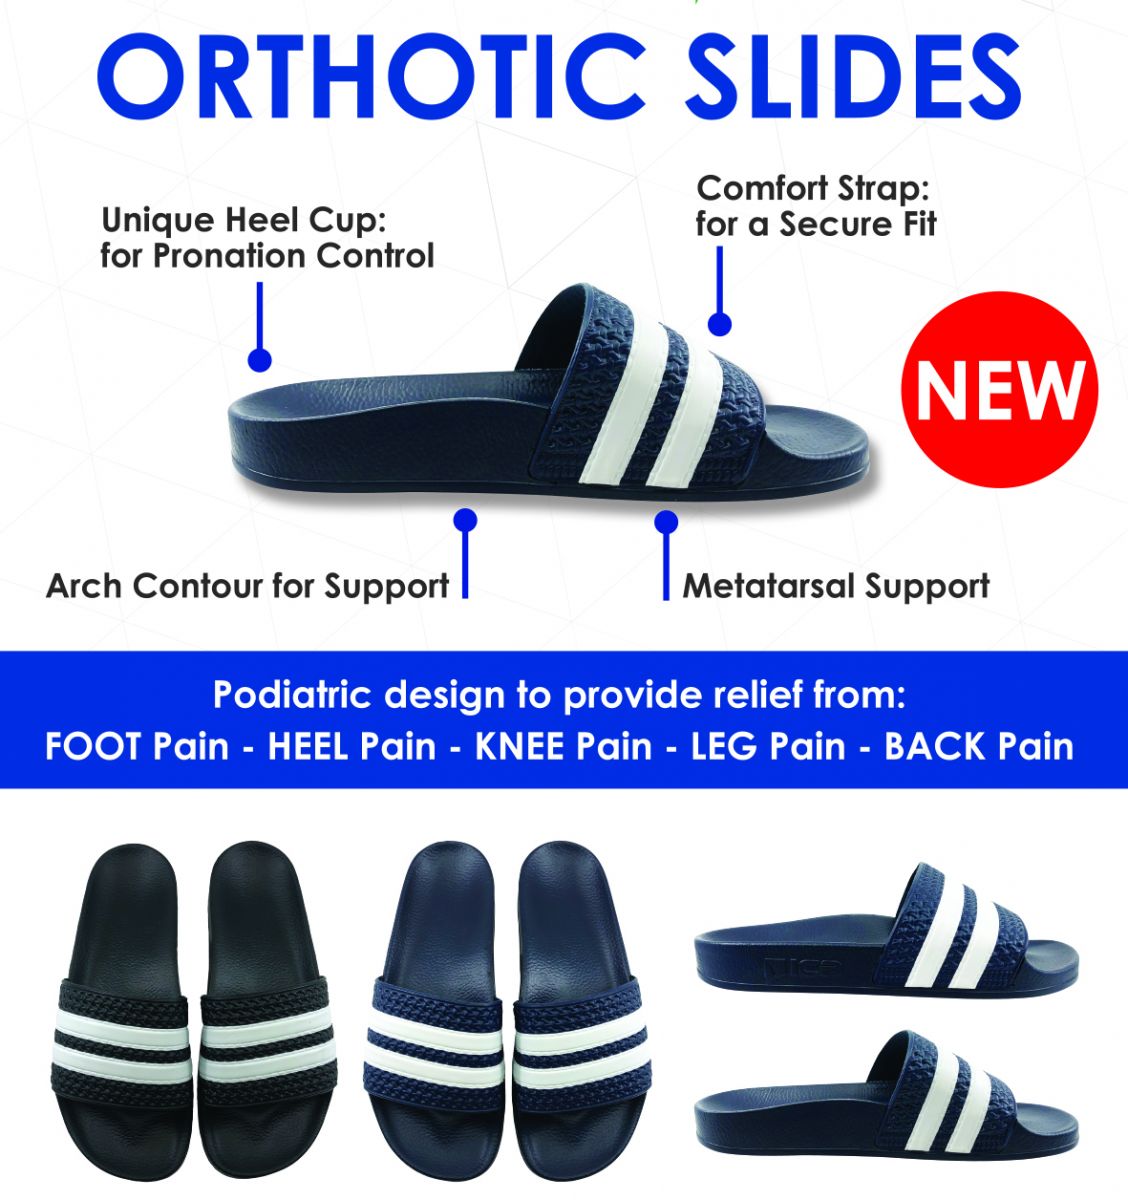 ICB Orthotic Slides are the perfect alternative to traditional